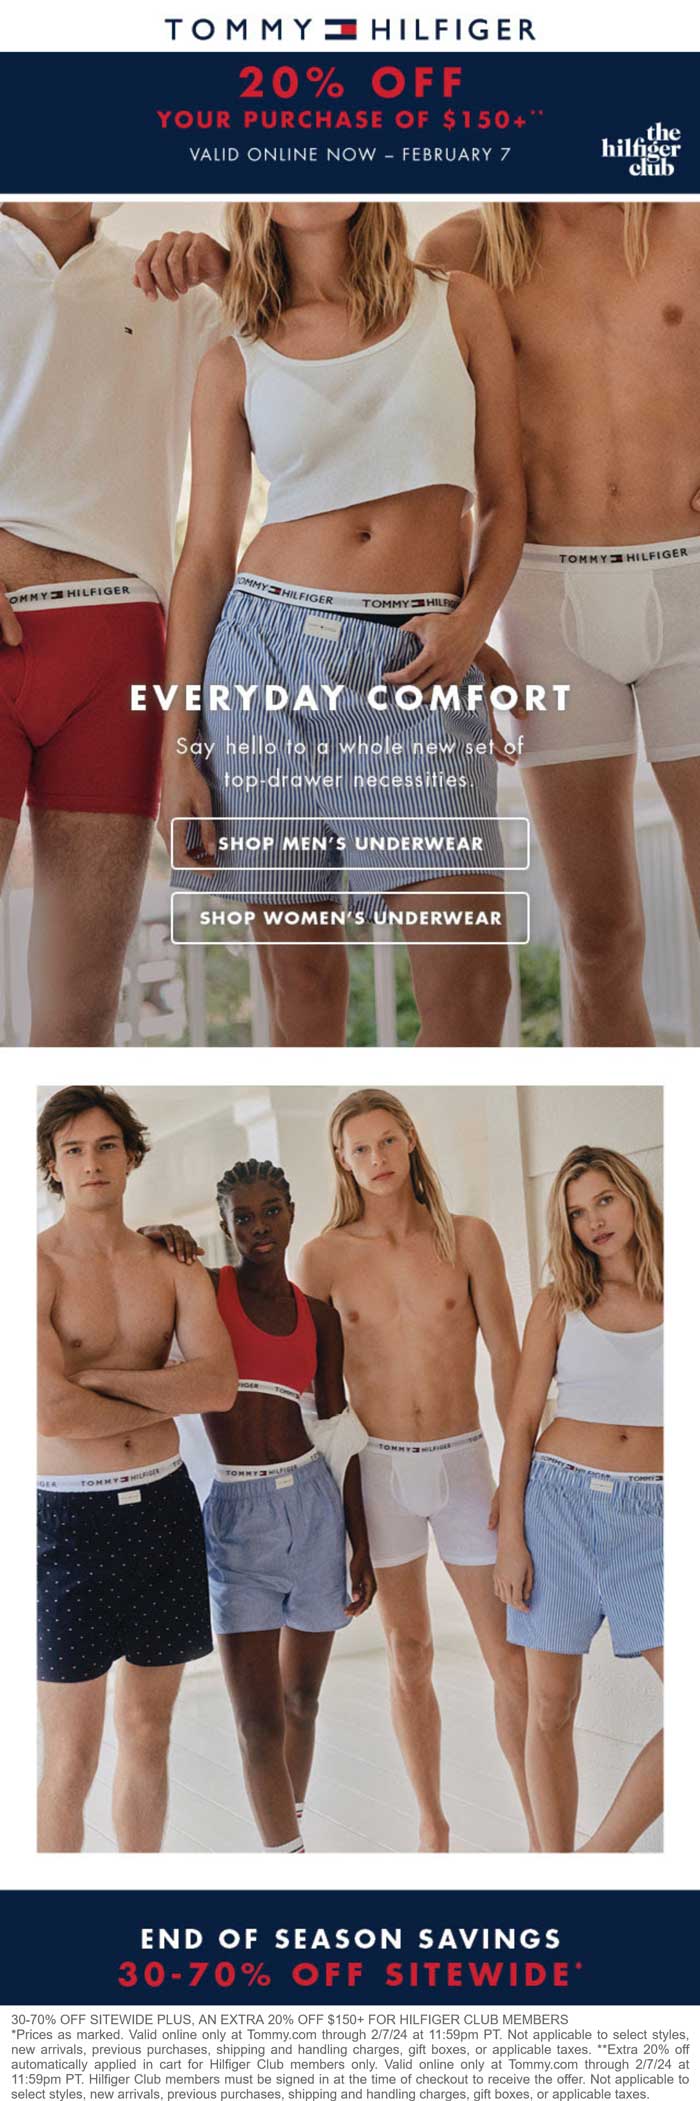 Tommy Hilfiger stores Coupon  30-70% off everything online + another 20% off $150 logged in at Tommy Hilfiger #tommyhilfiger 